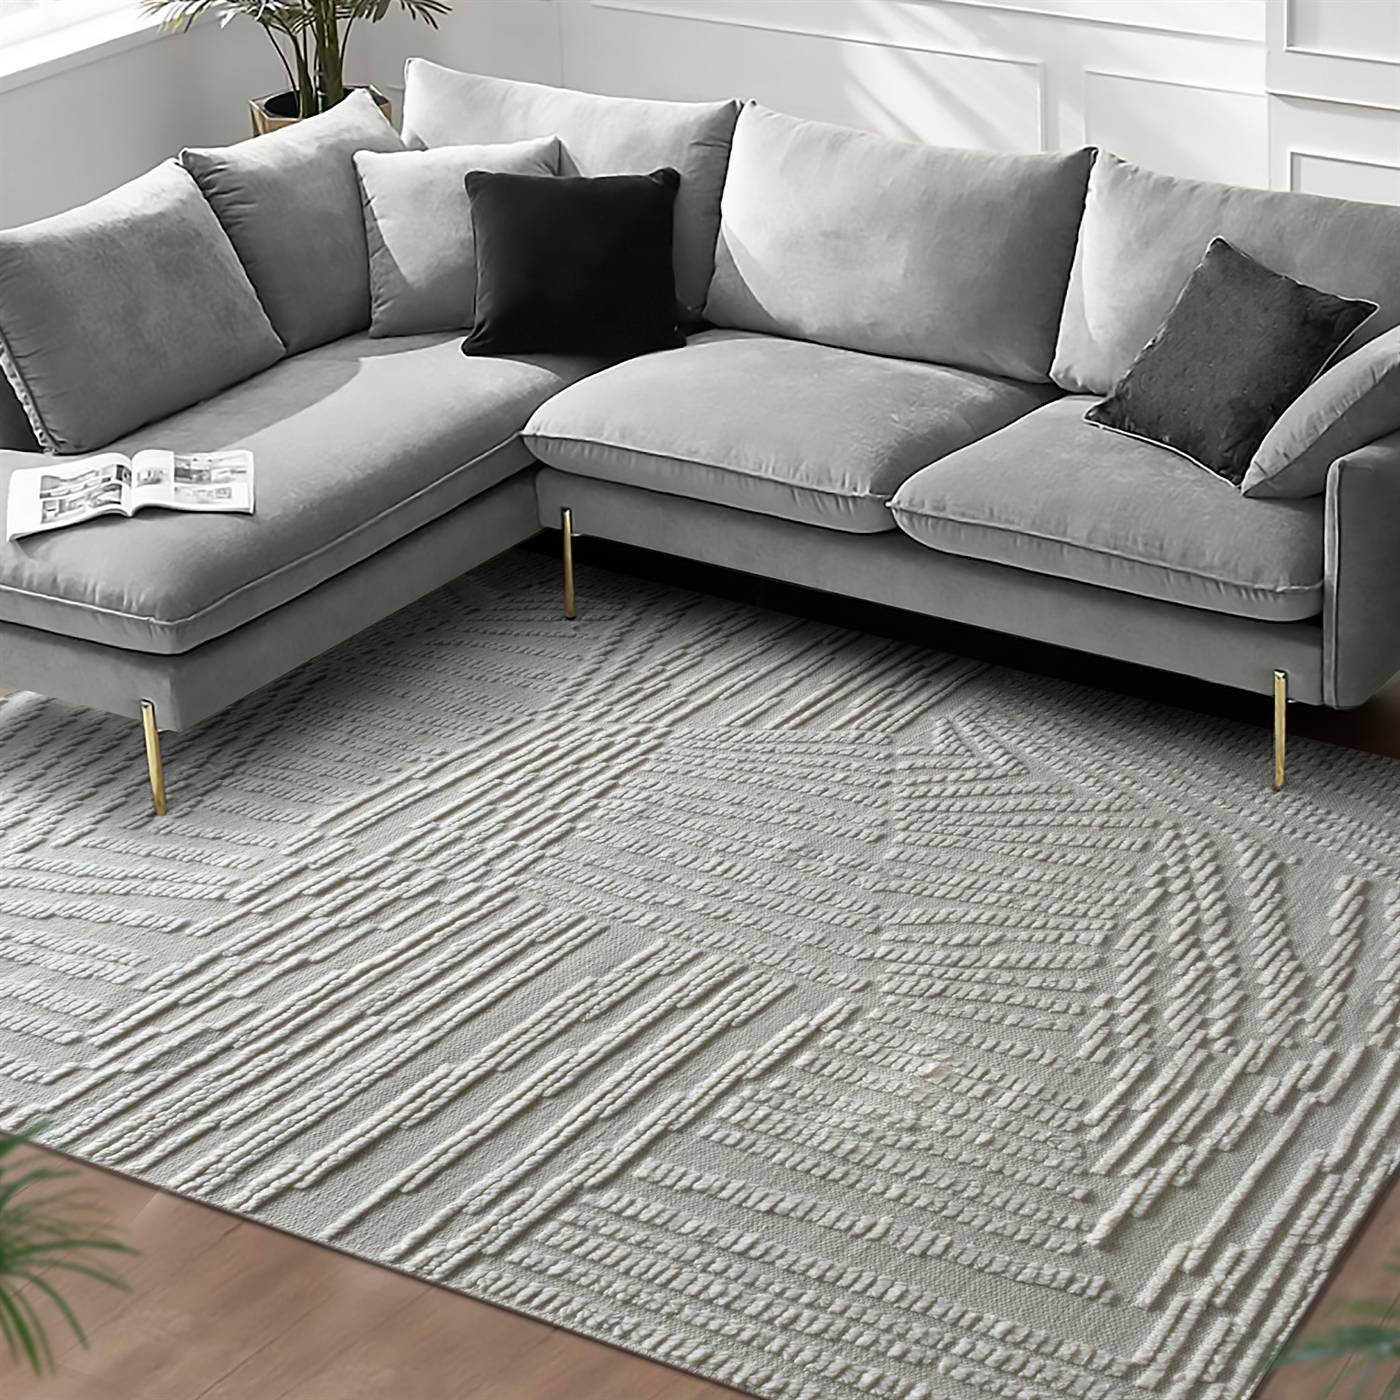 Area Rug, Bedroom Rug, Living Room Rug, Living Area Rug, Indian Rug, Office Carpet, Office Rug, Shop Rug Online, Natural White, Nz Wool , Hand Knotted , Handknotted, All Cut, Intricate 